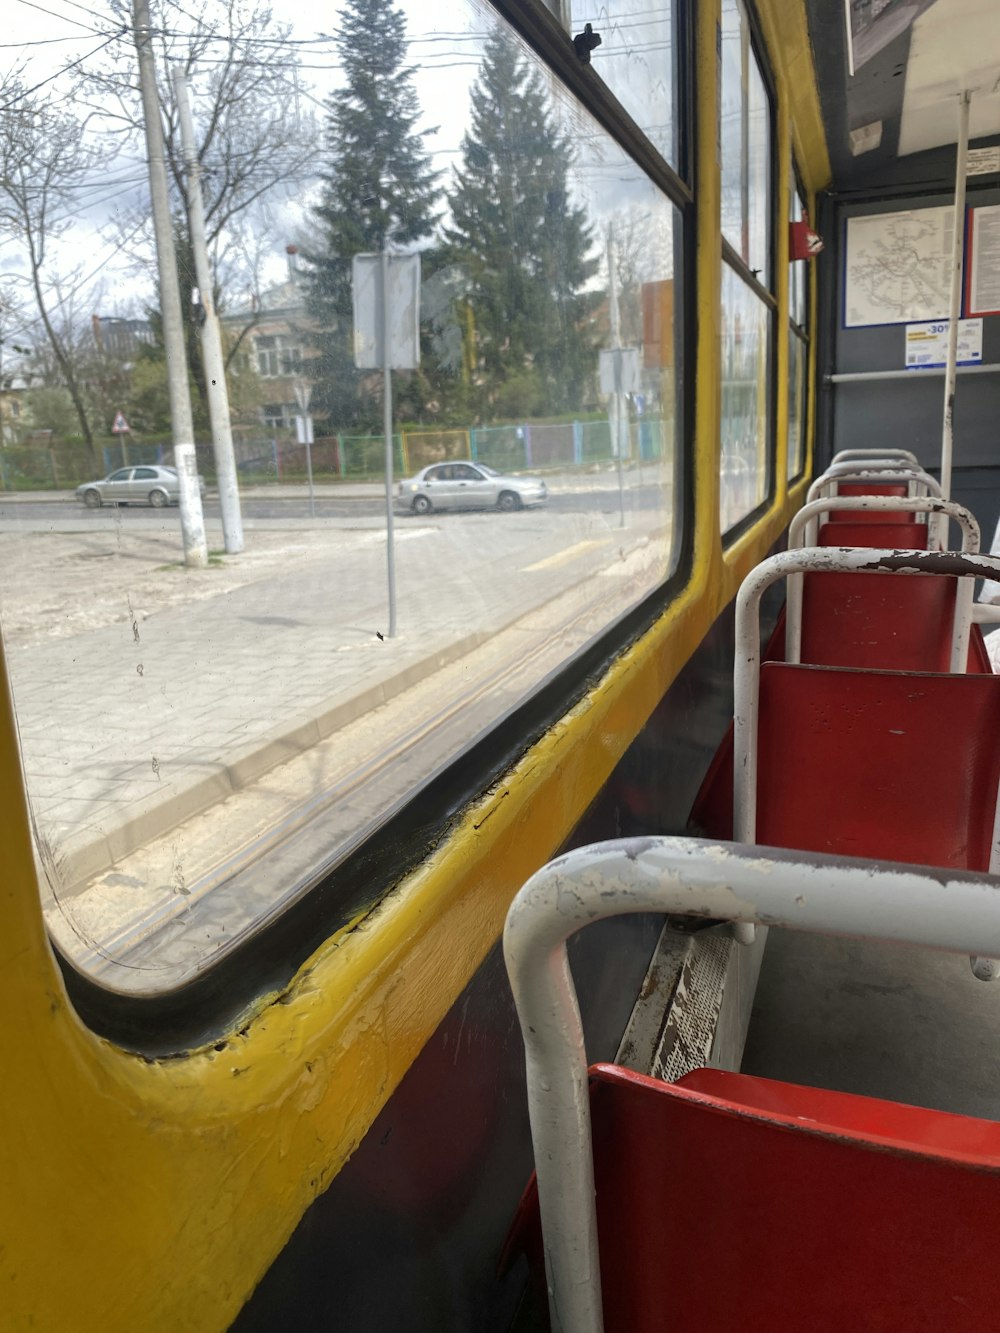 a view of a street from inside a bus